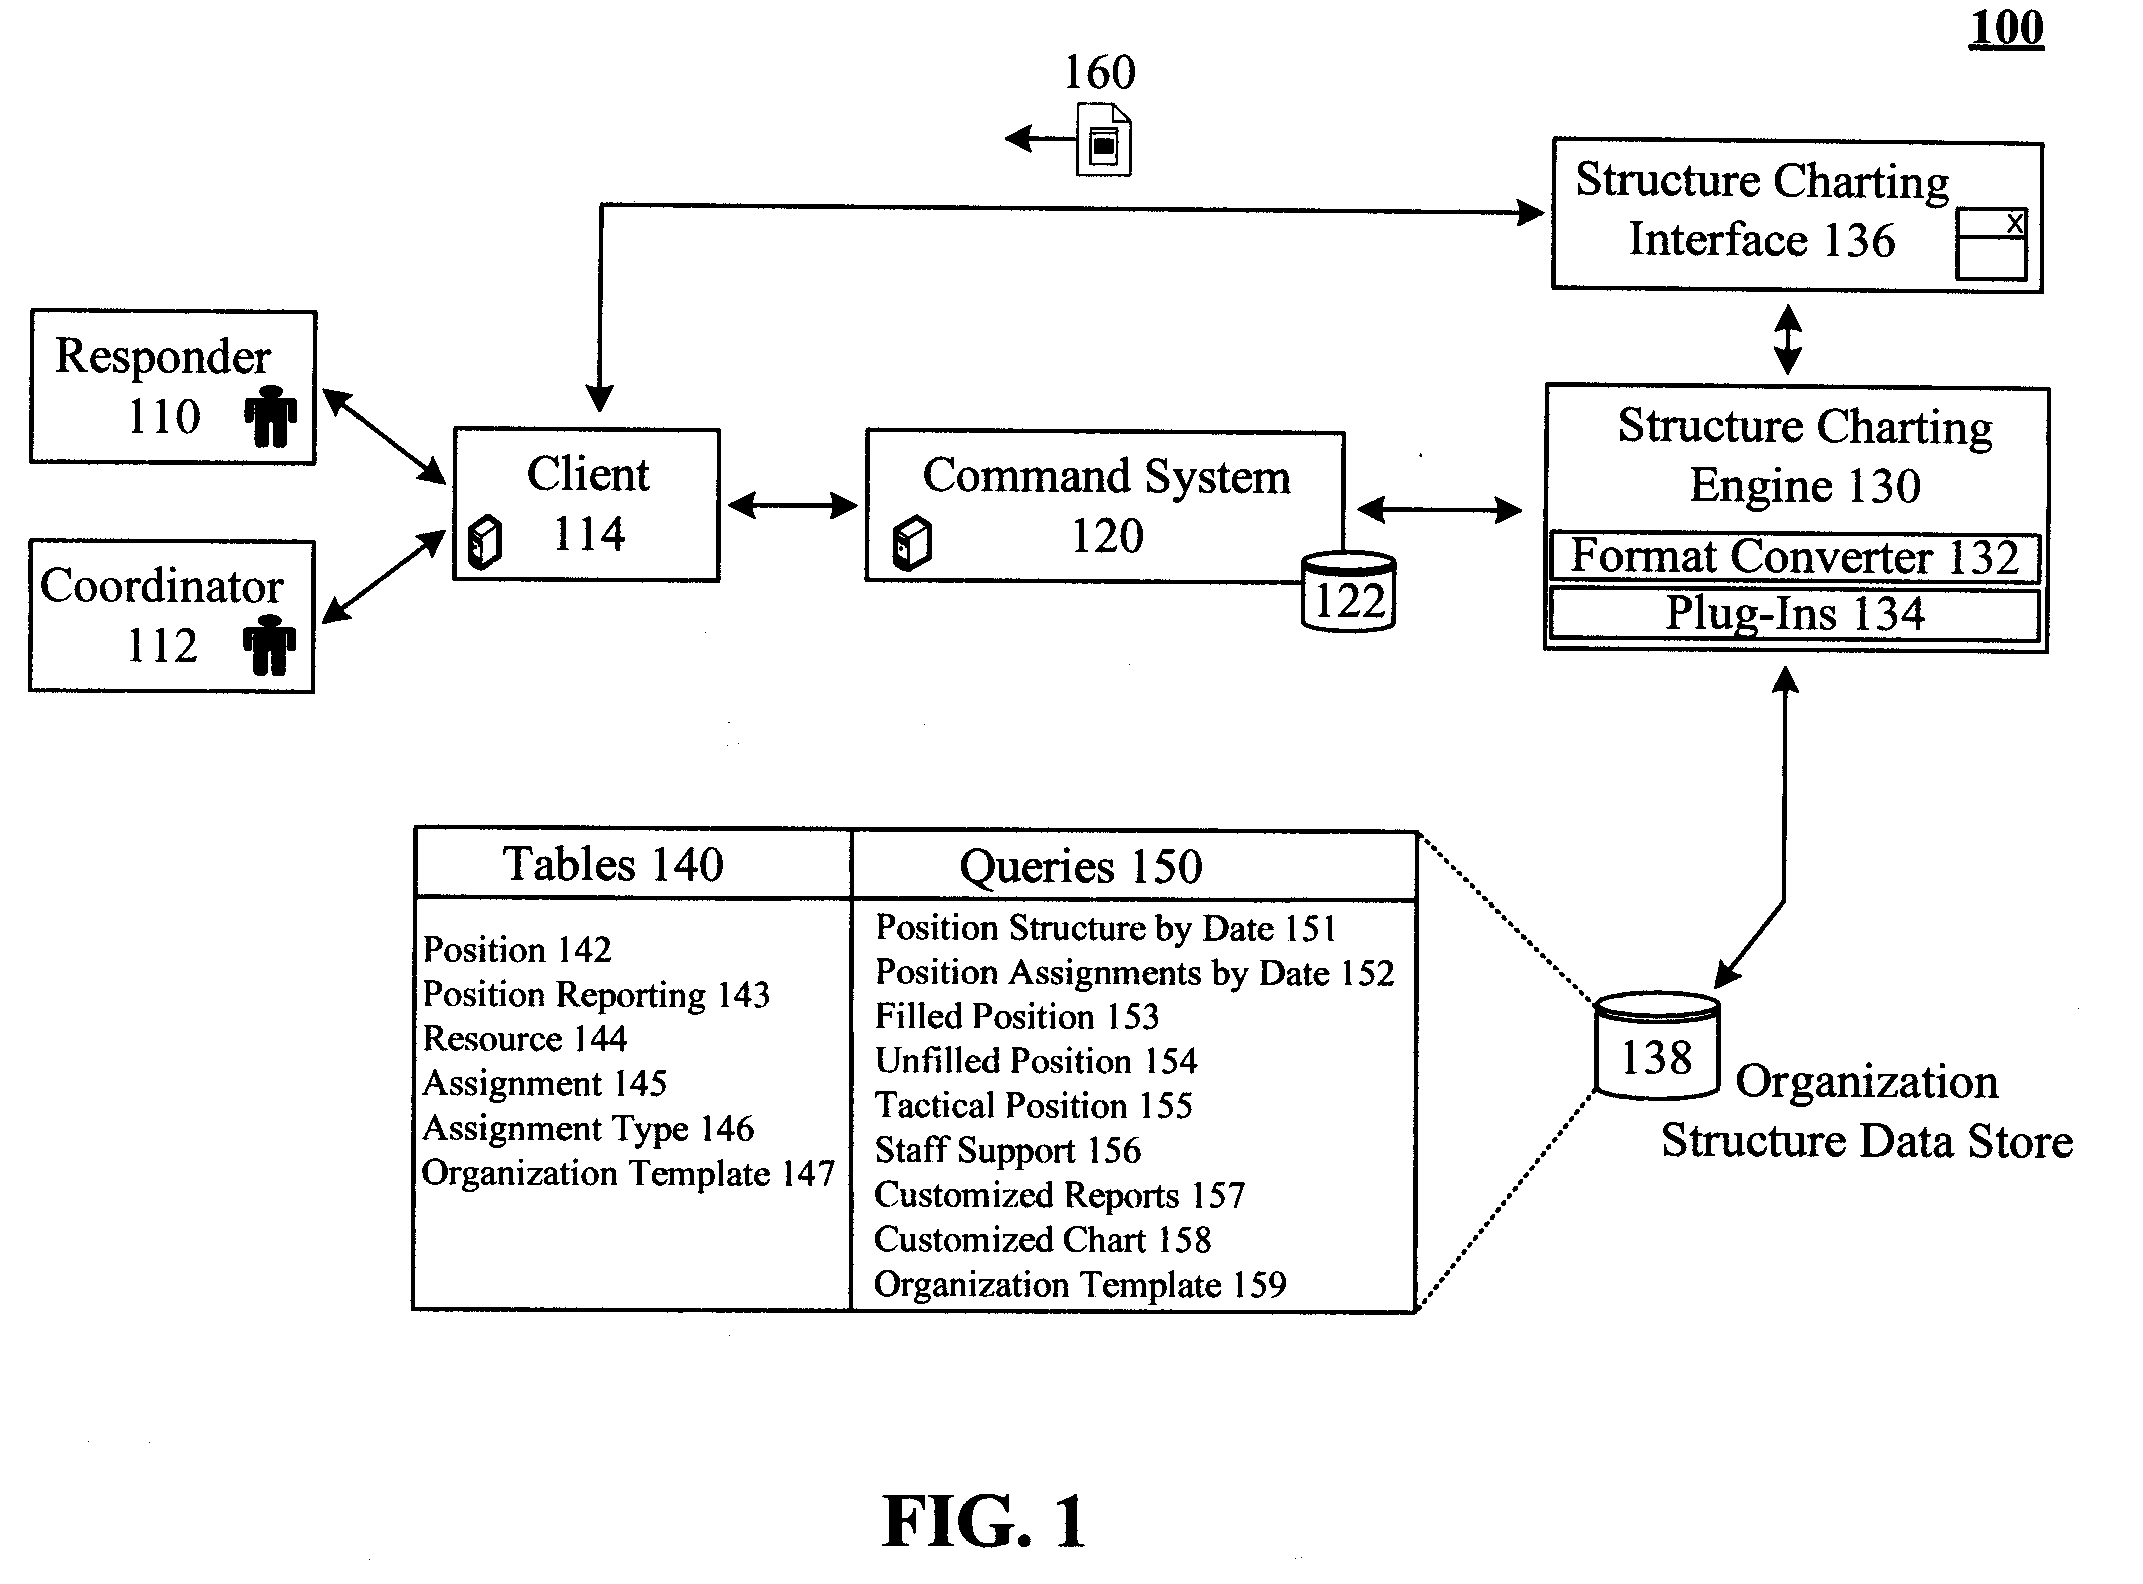 Storing and depicting organizations that are subject to dynamic event driven restructuring